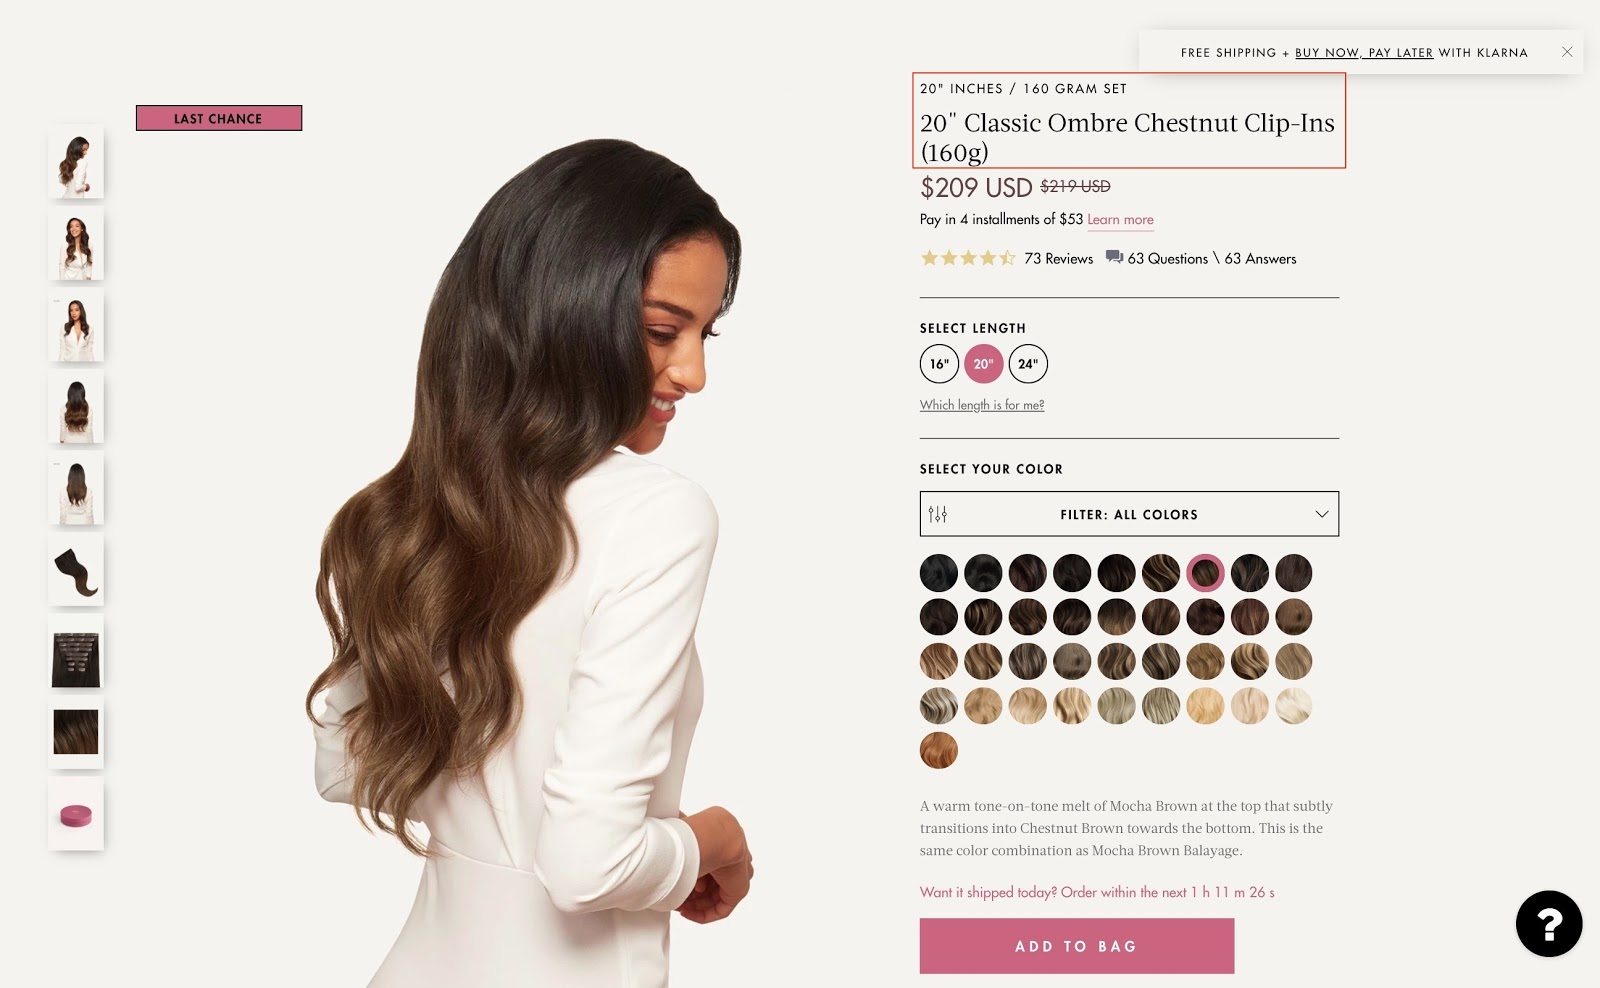 An excellent example of a product page from LuxyHair.